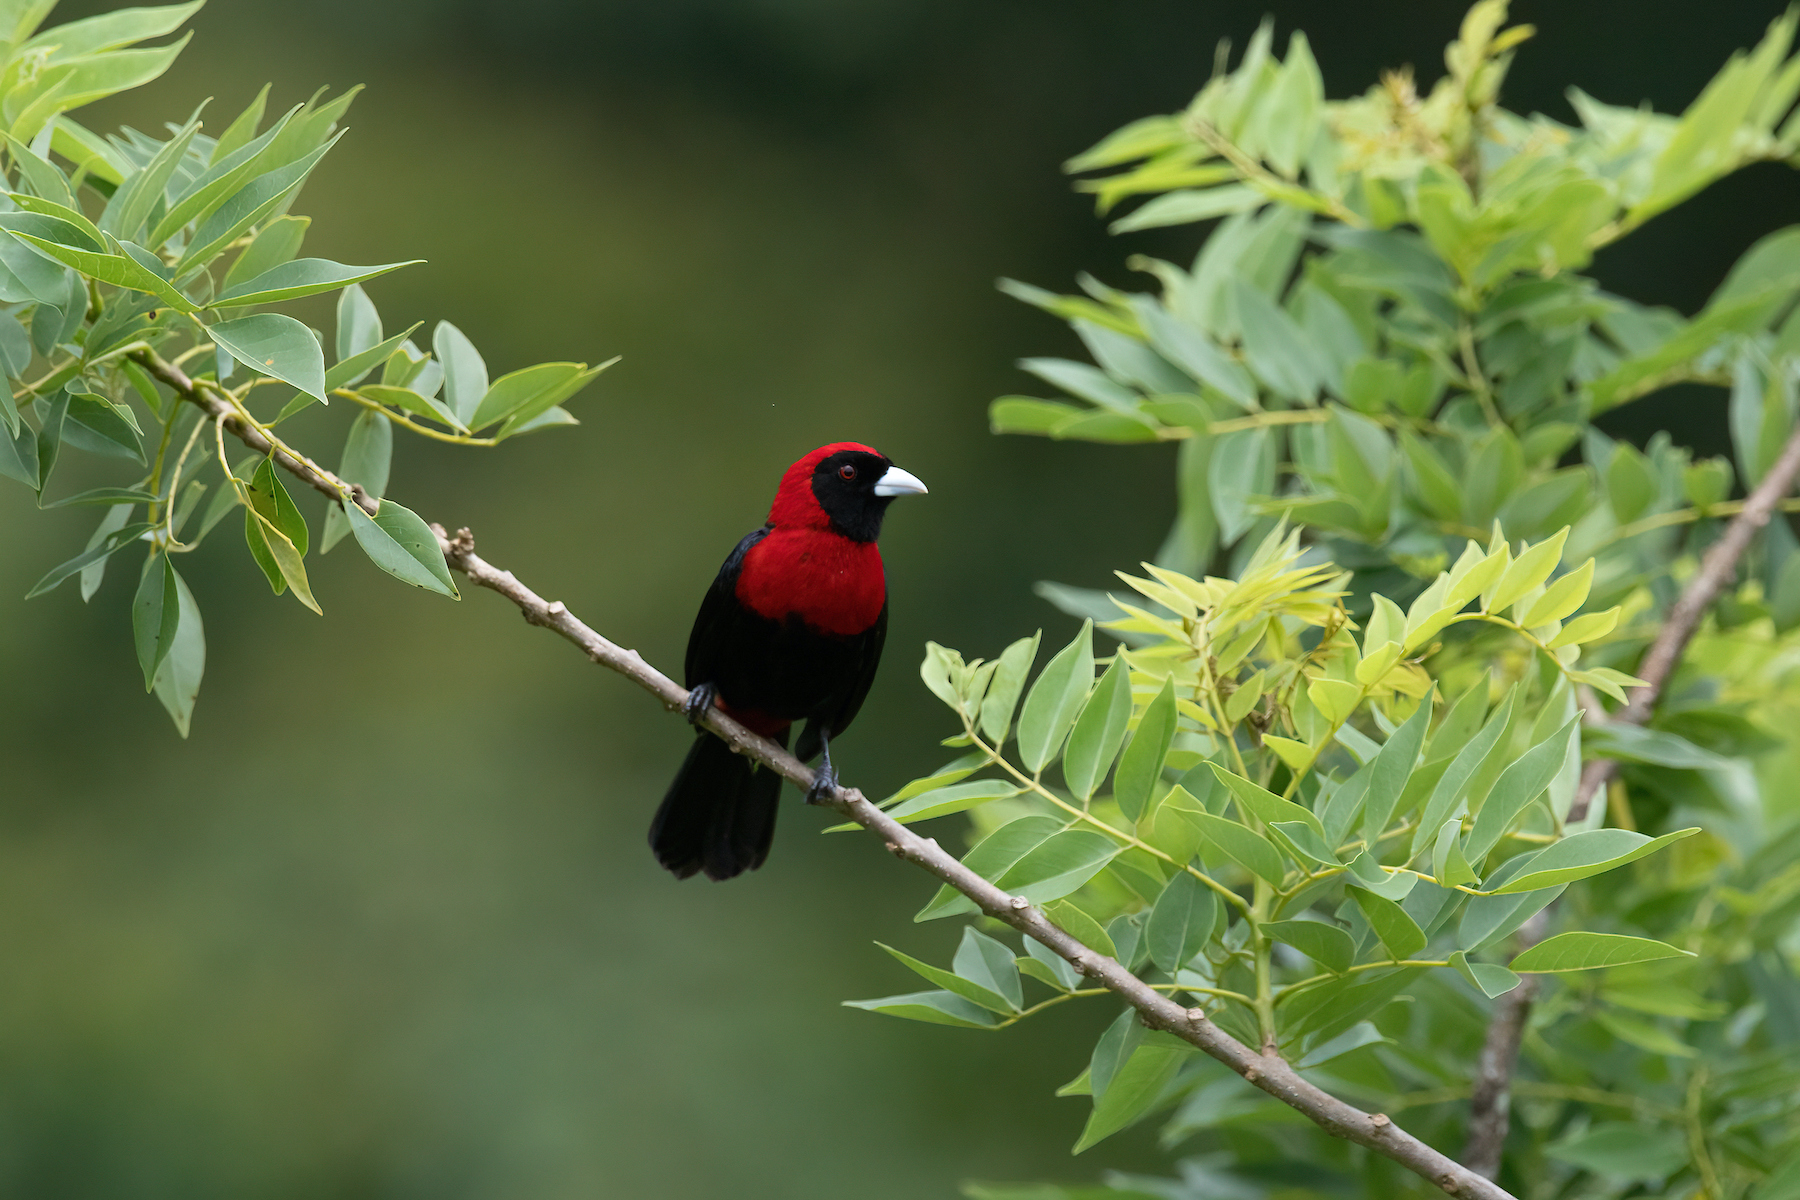 Crimson-collared Tanager on our Costa Rica wildlife photography tour